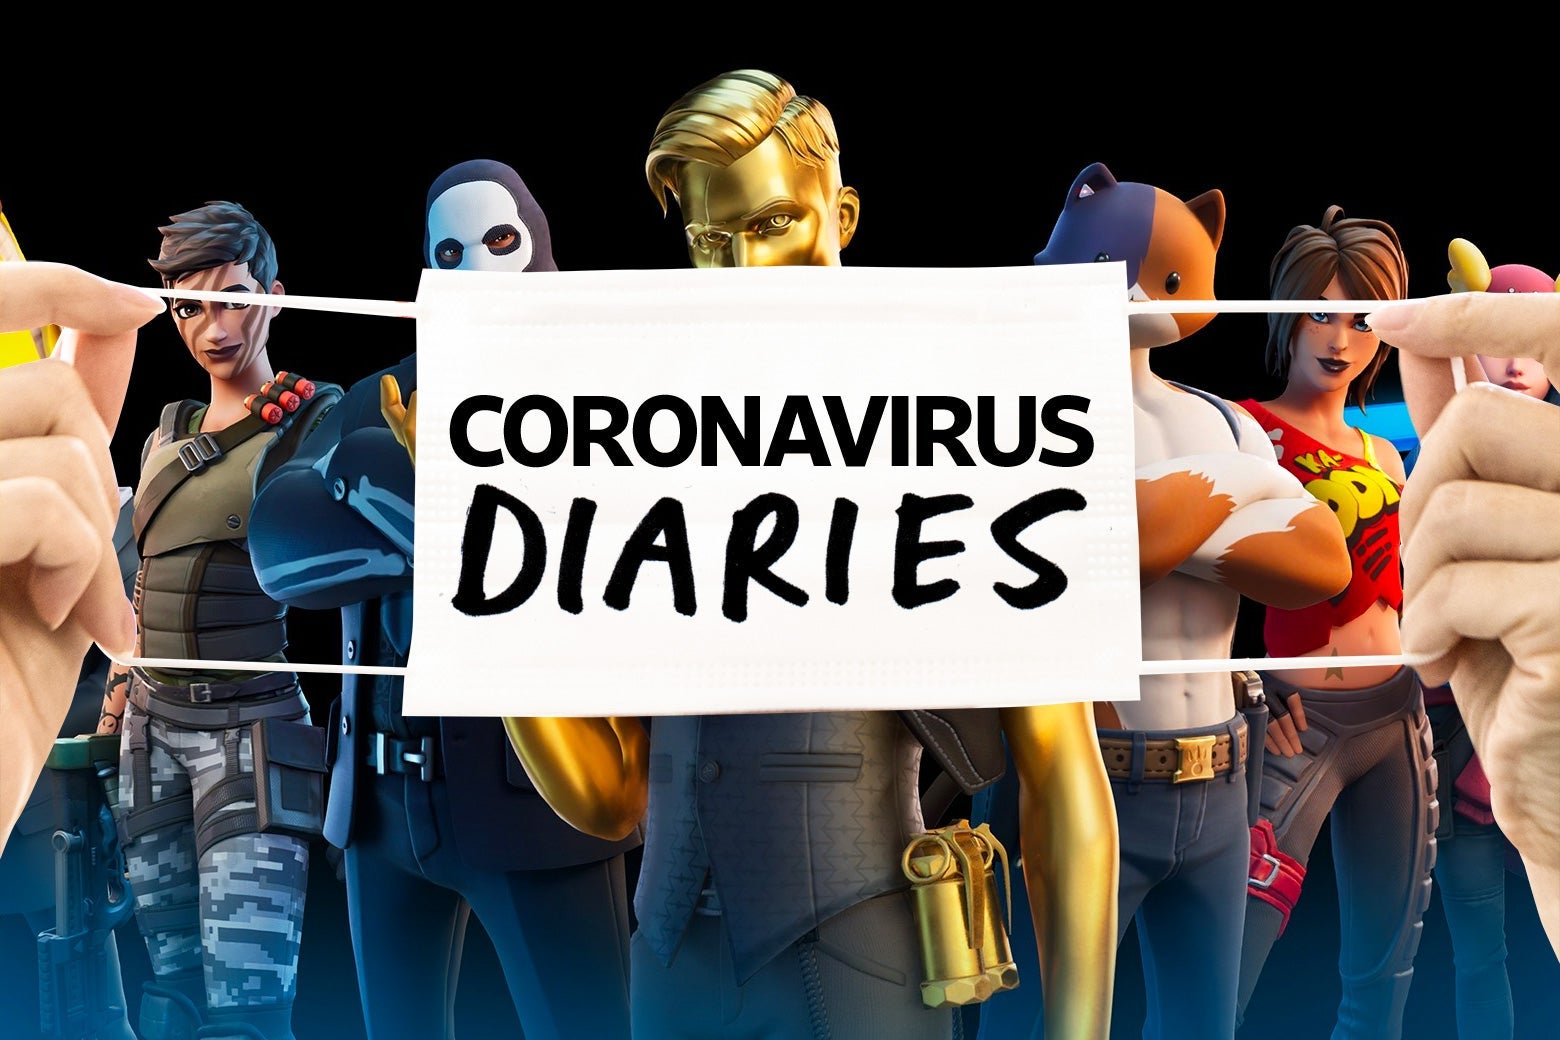 Two hands holding a mask that says "Coronavirus Diaries" over images of several characters from Fortnite including a golden man, an anthropomorphized cat with large muscles, and a man in a luchador-like skull mask.